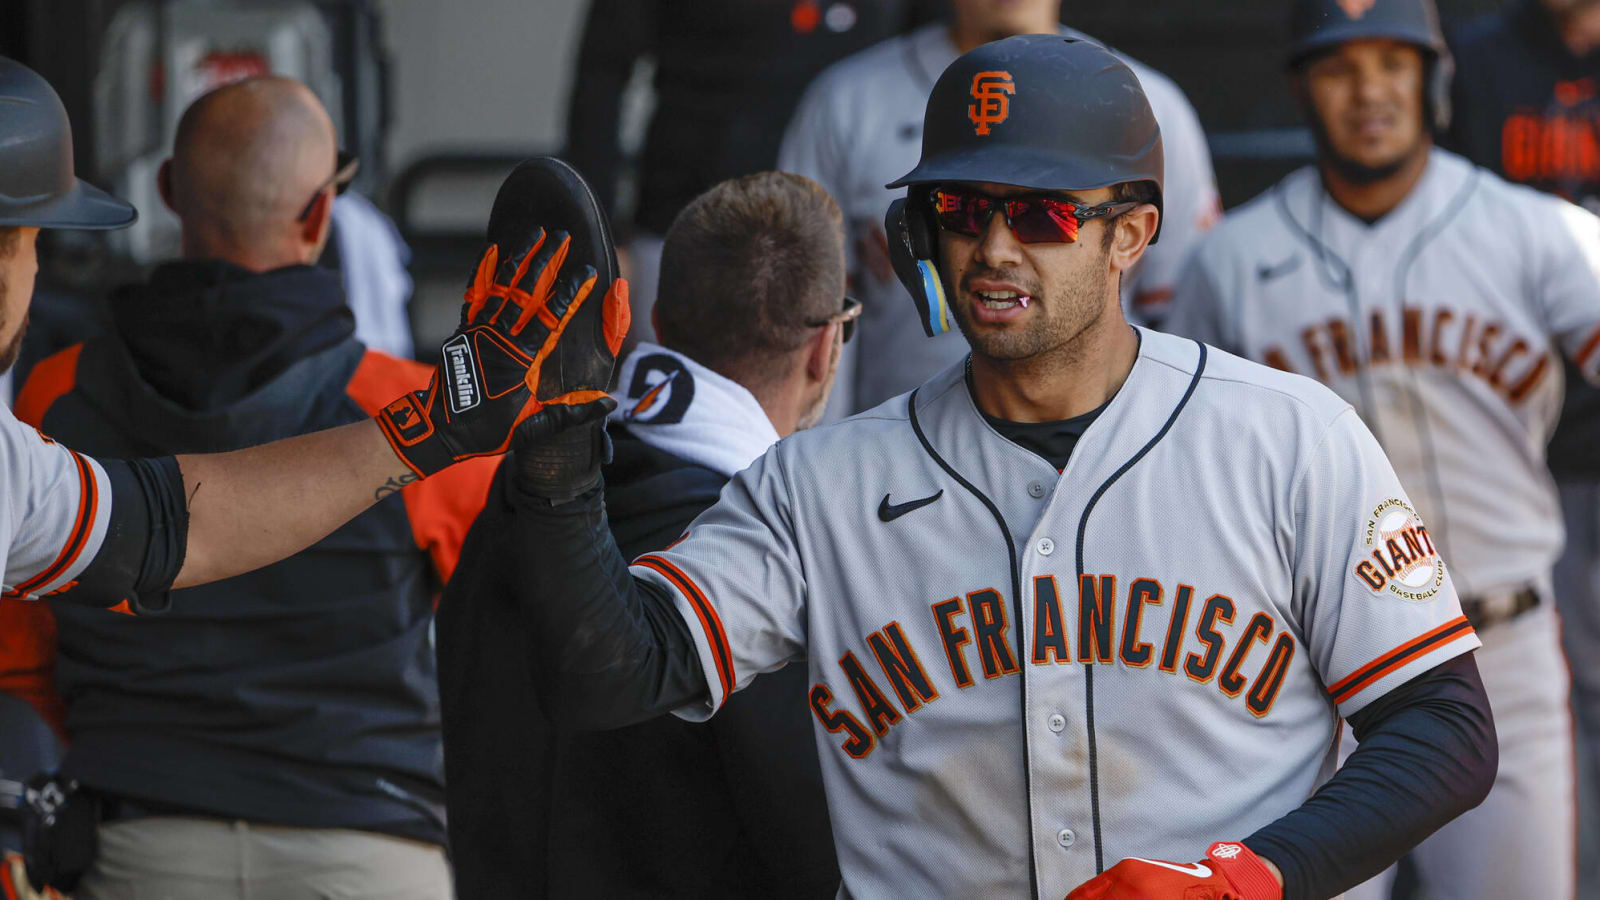 Giants rookie hits MLB homer with Barry Bonds-style bat